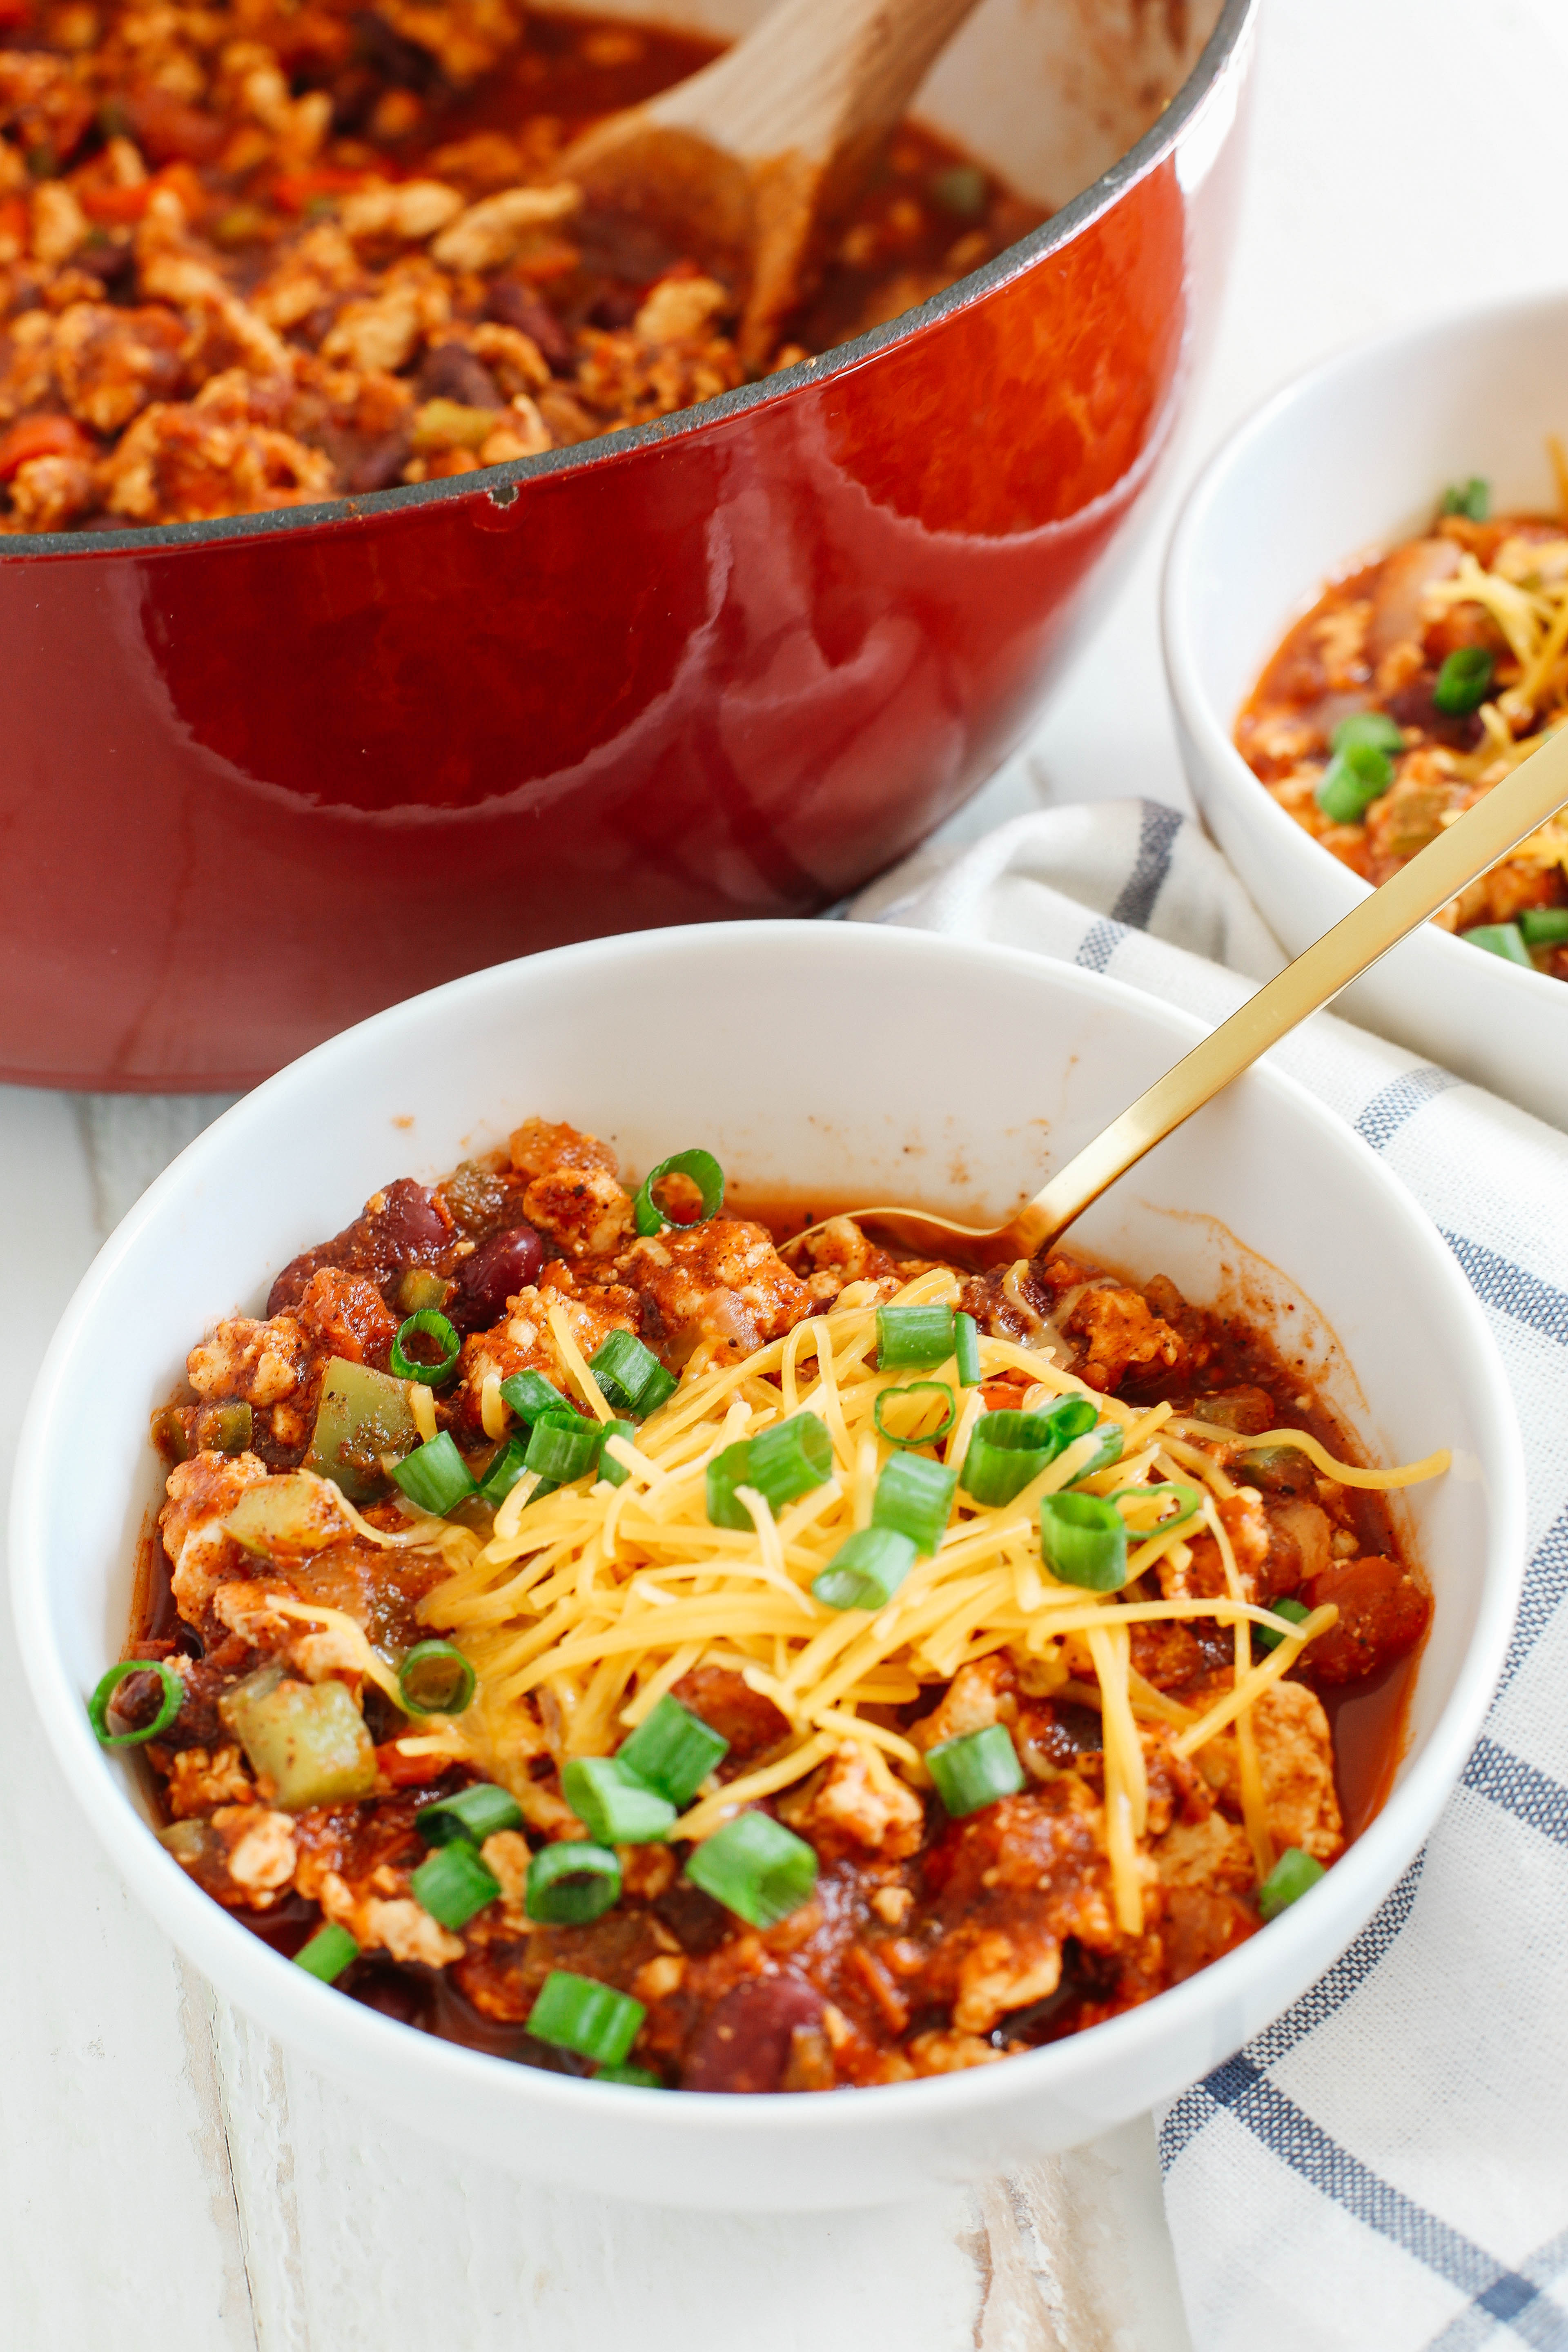 The BEST Turkey Chili recipe full of fresh veggies, lean turkey and tons of delicious flavor! Perfect for tailgates, meal prep and weekly dinners!